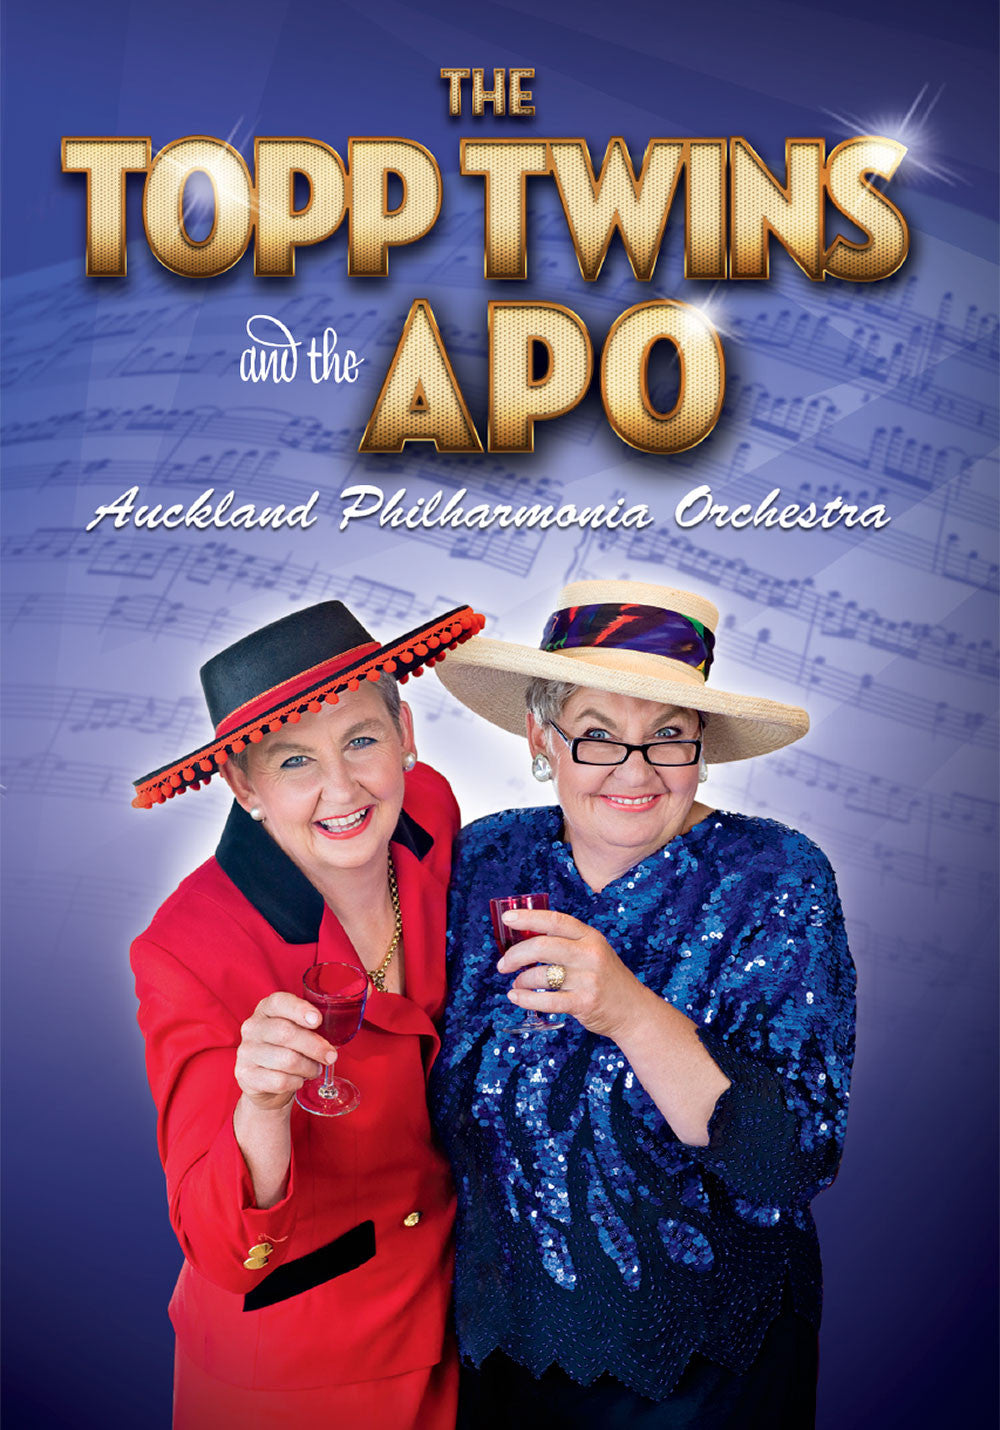 The Topp Twins and the APO